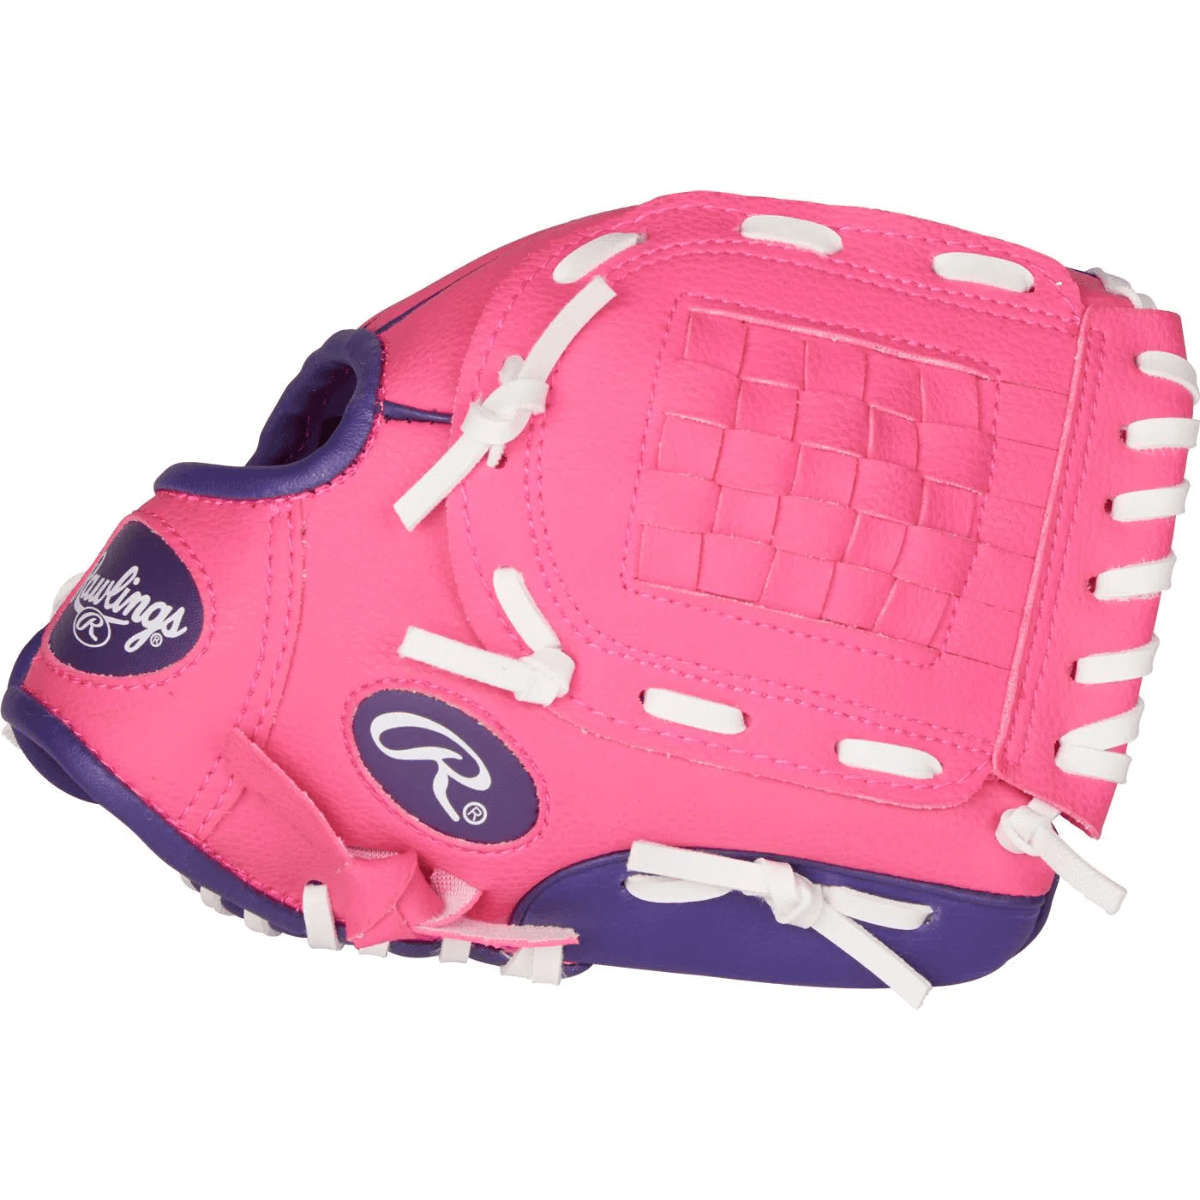 Rawlings Players Youth Glove Series